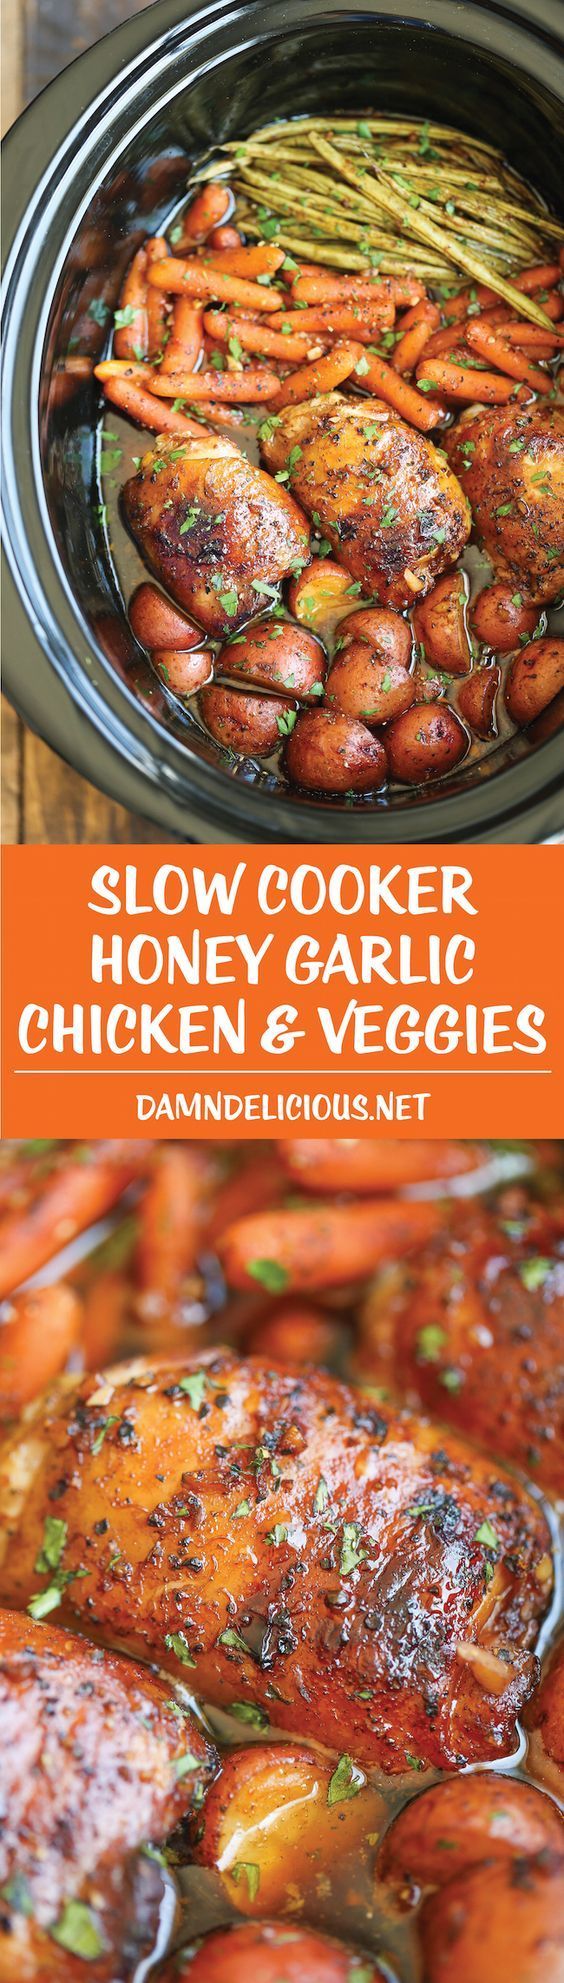 Slow Cooker Honey Garlic Chicken and Veggies Recipe plus 49 of the most pinned crock pot recipes